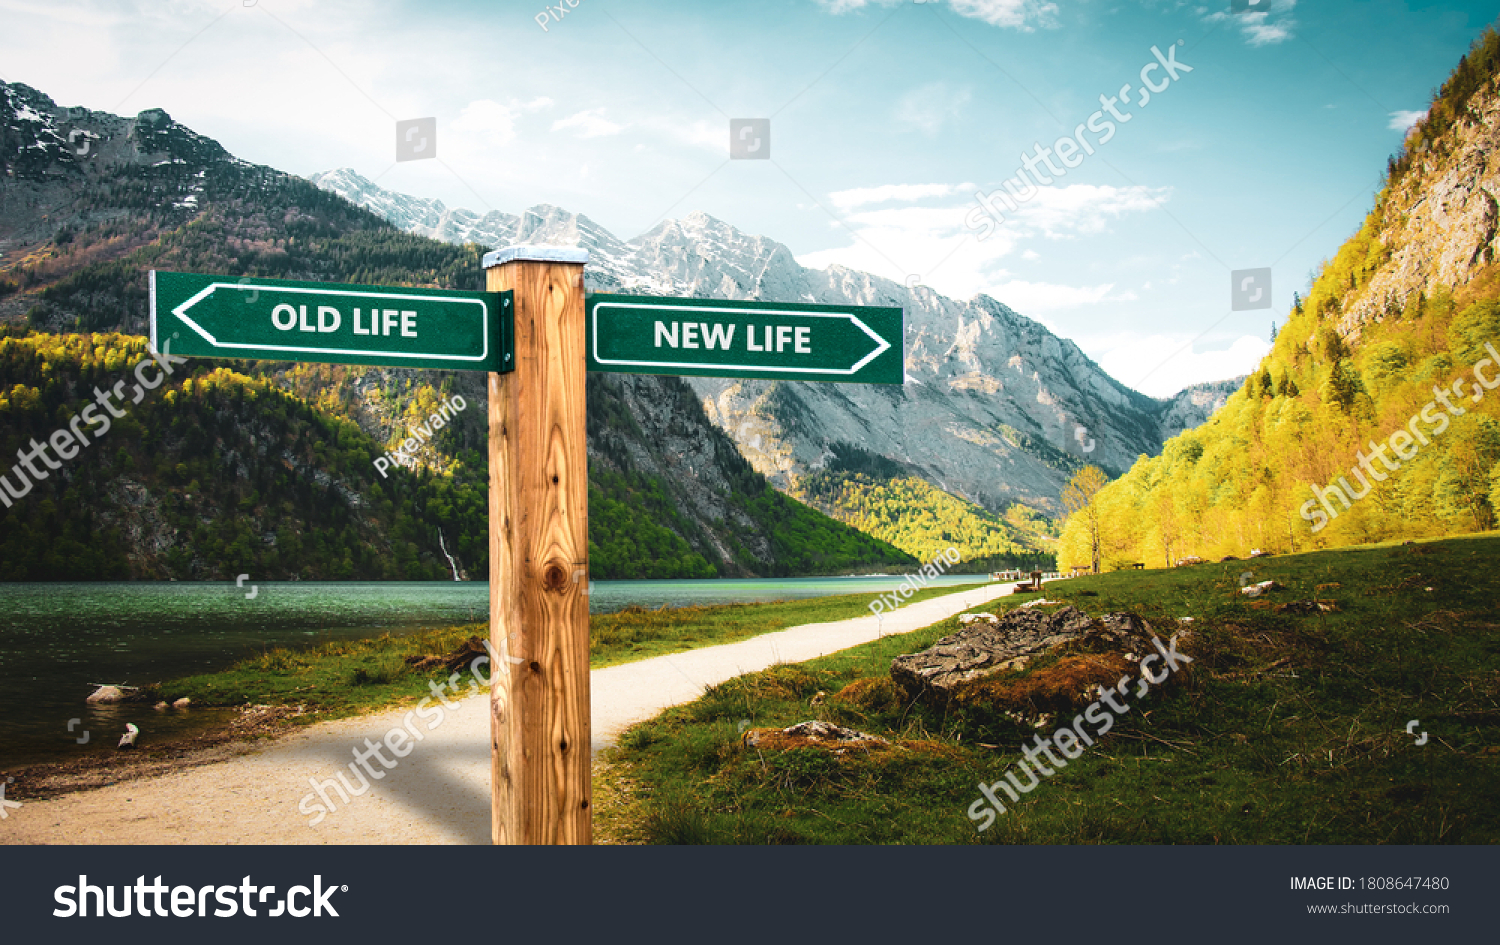 Street Sign the Direction Way to NEW LIFE versus OLD LIFE #1808647480